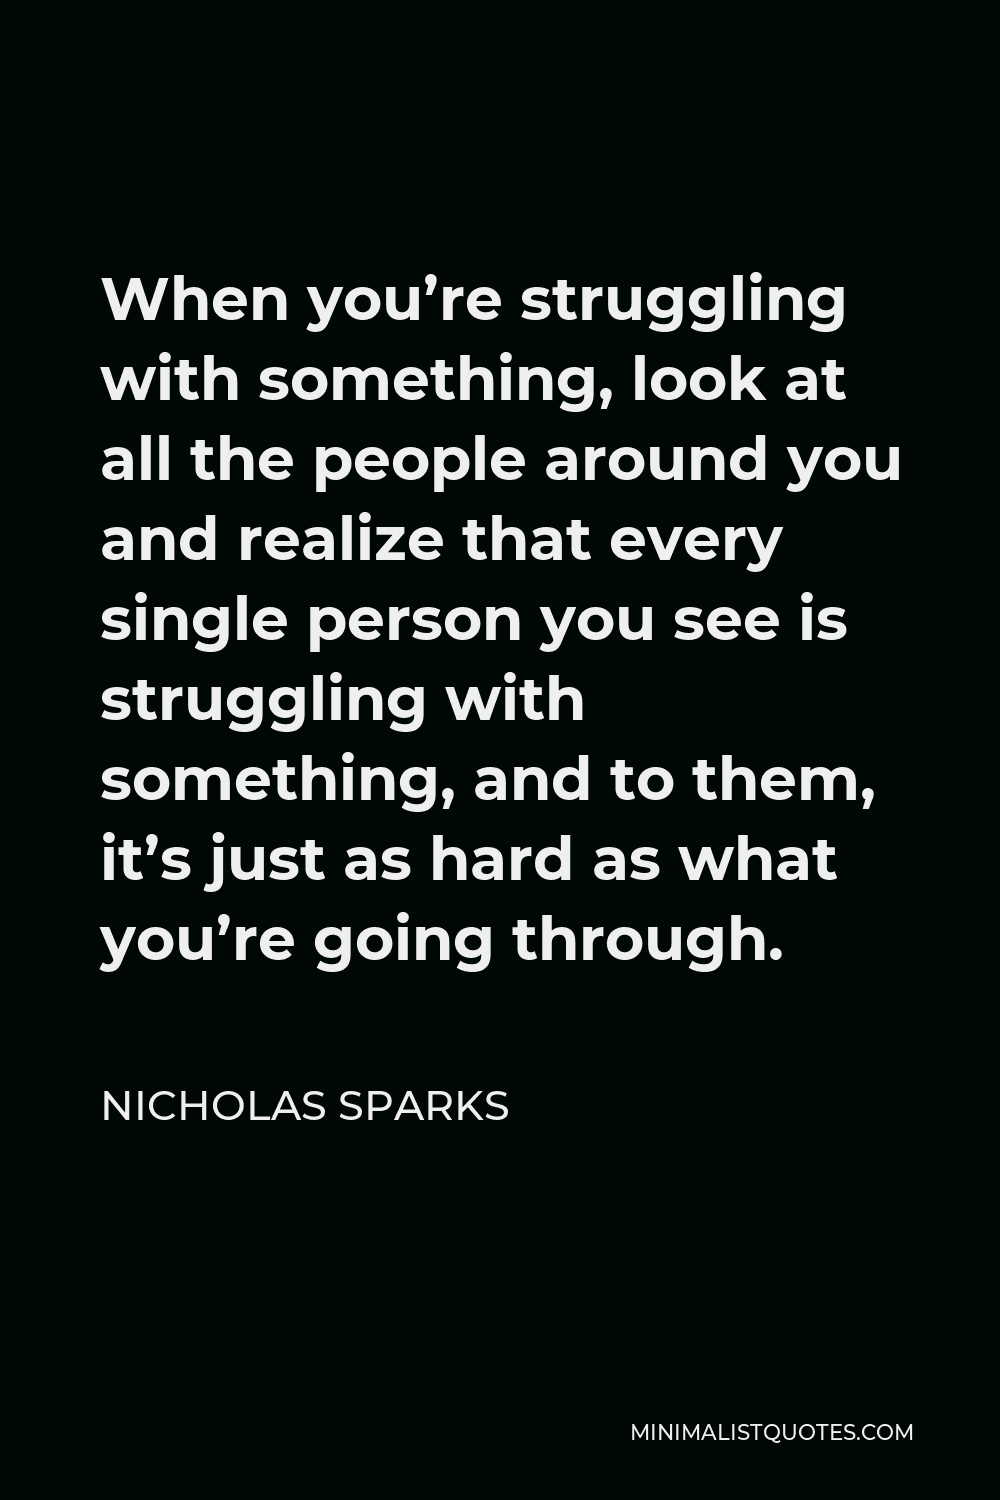 Nicholas Sparks Quote - When you’re struggling with something, look at all the people around you and realize that every single person you see is struggling with something, and to them, it’s just as hard as what you’re going through.